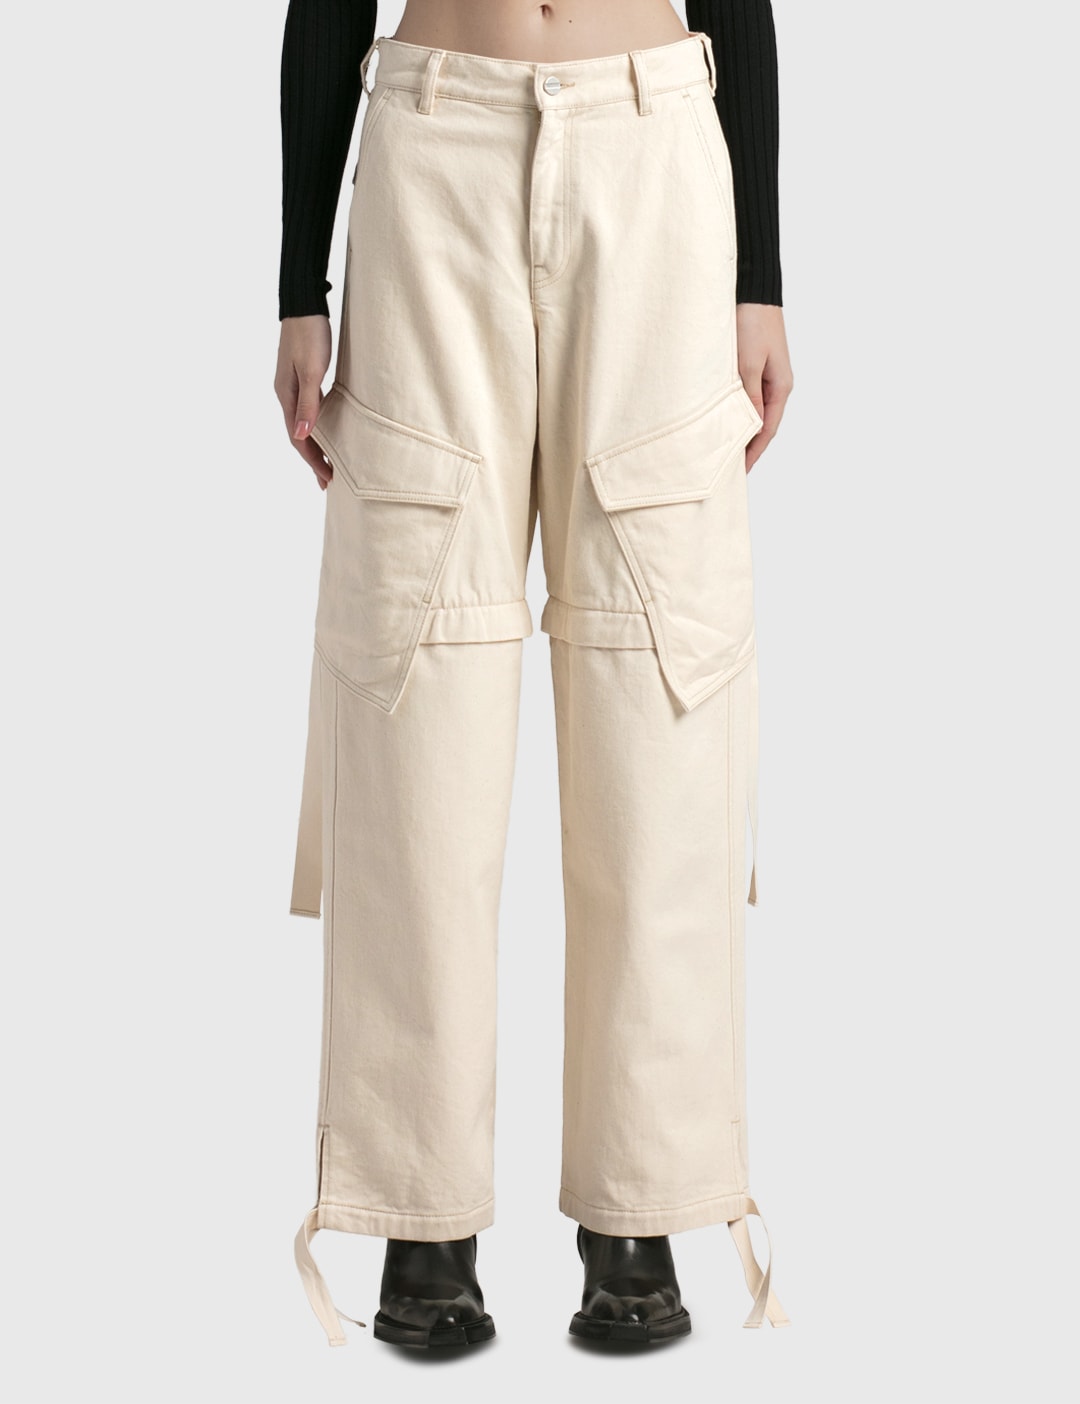 Dion Lee - DENIM PARACHUTE PANTS | HBX - Globally Curated Fashion and  Lifestyle by Hypebeast